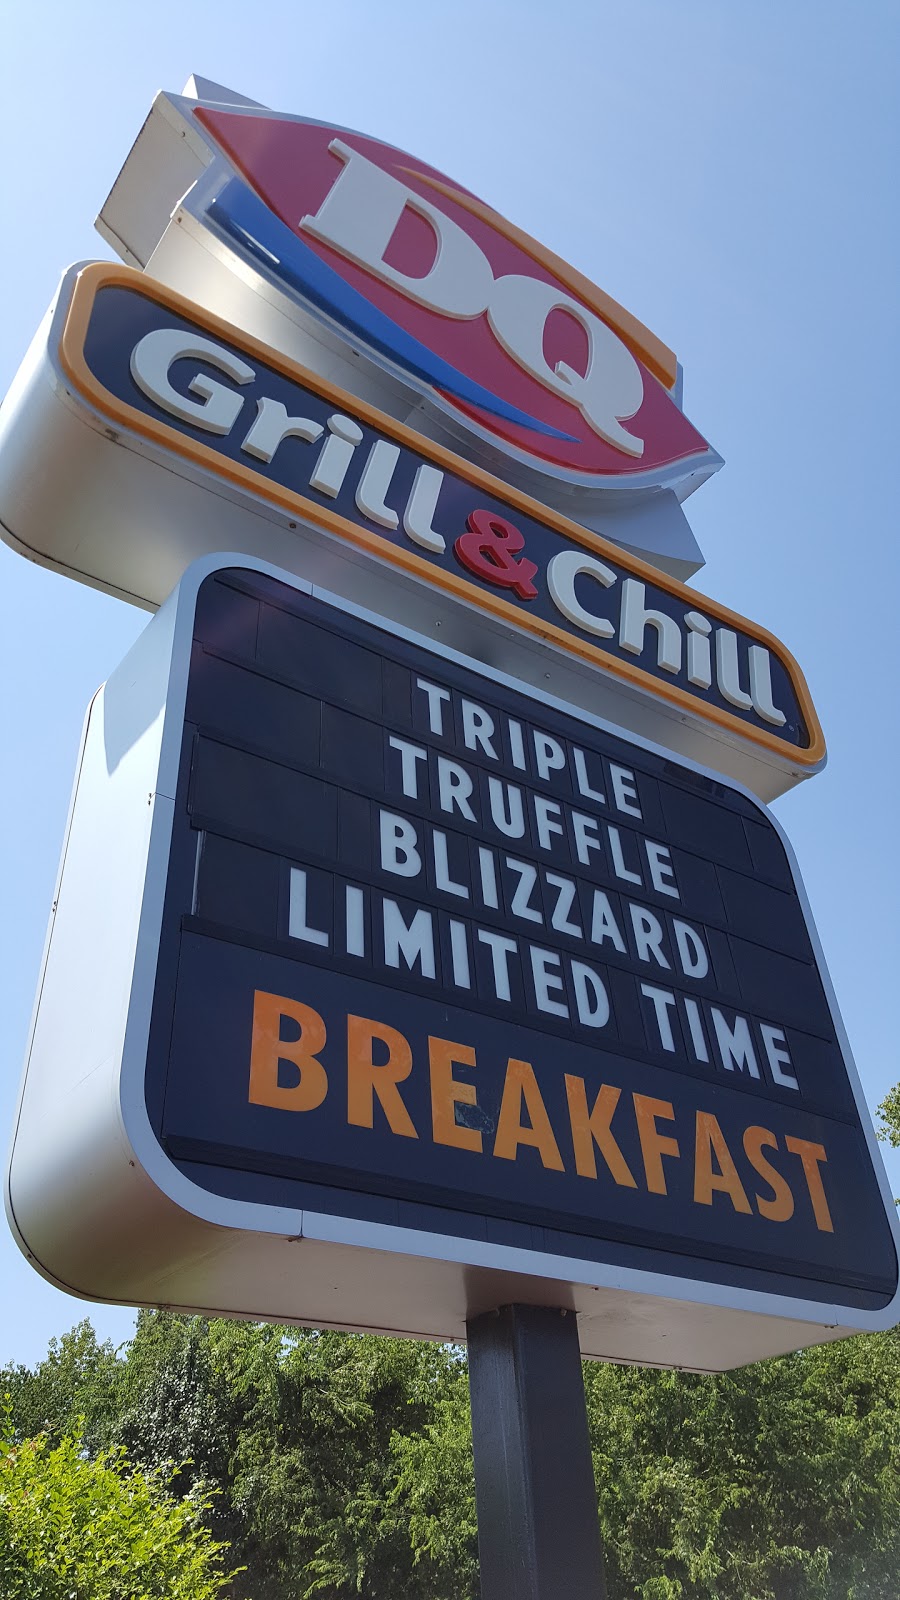 Dairy Queen Grill & Chill | Photo 9 of 10 | Address: 61 W Windsor Blvd, Windsor, VA 23487, USA | Phone: (757) 242-6446